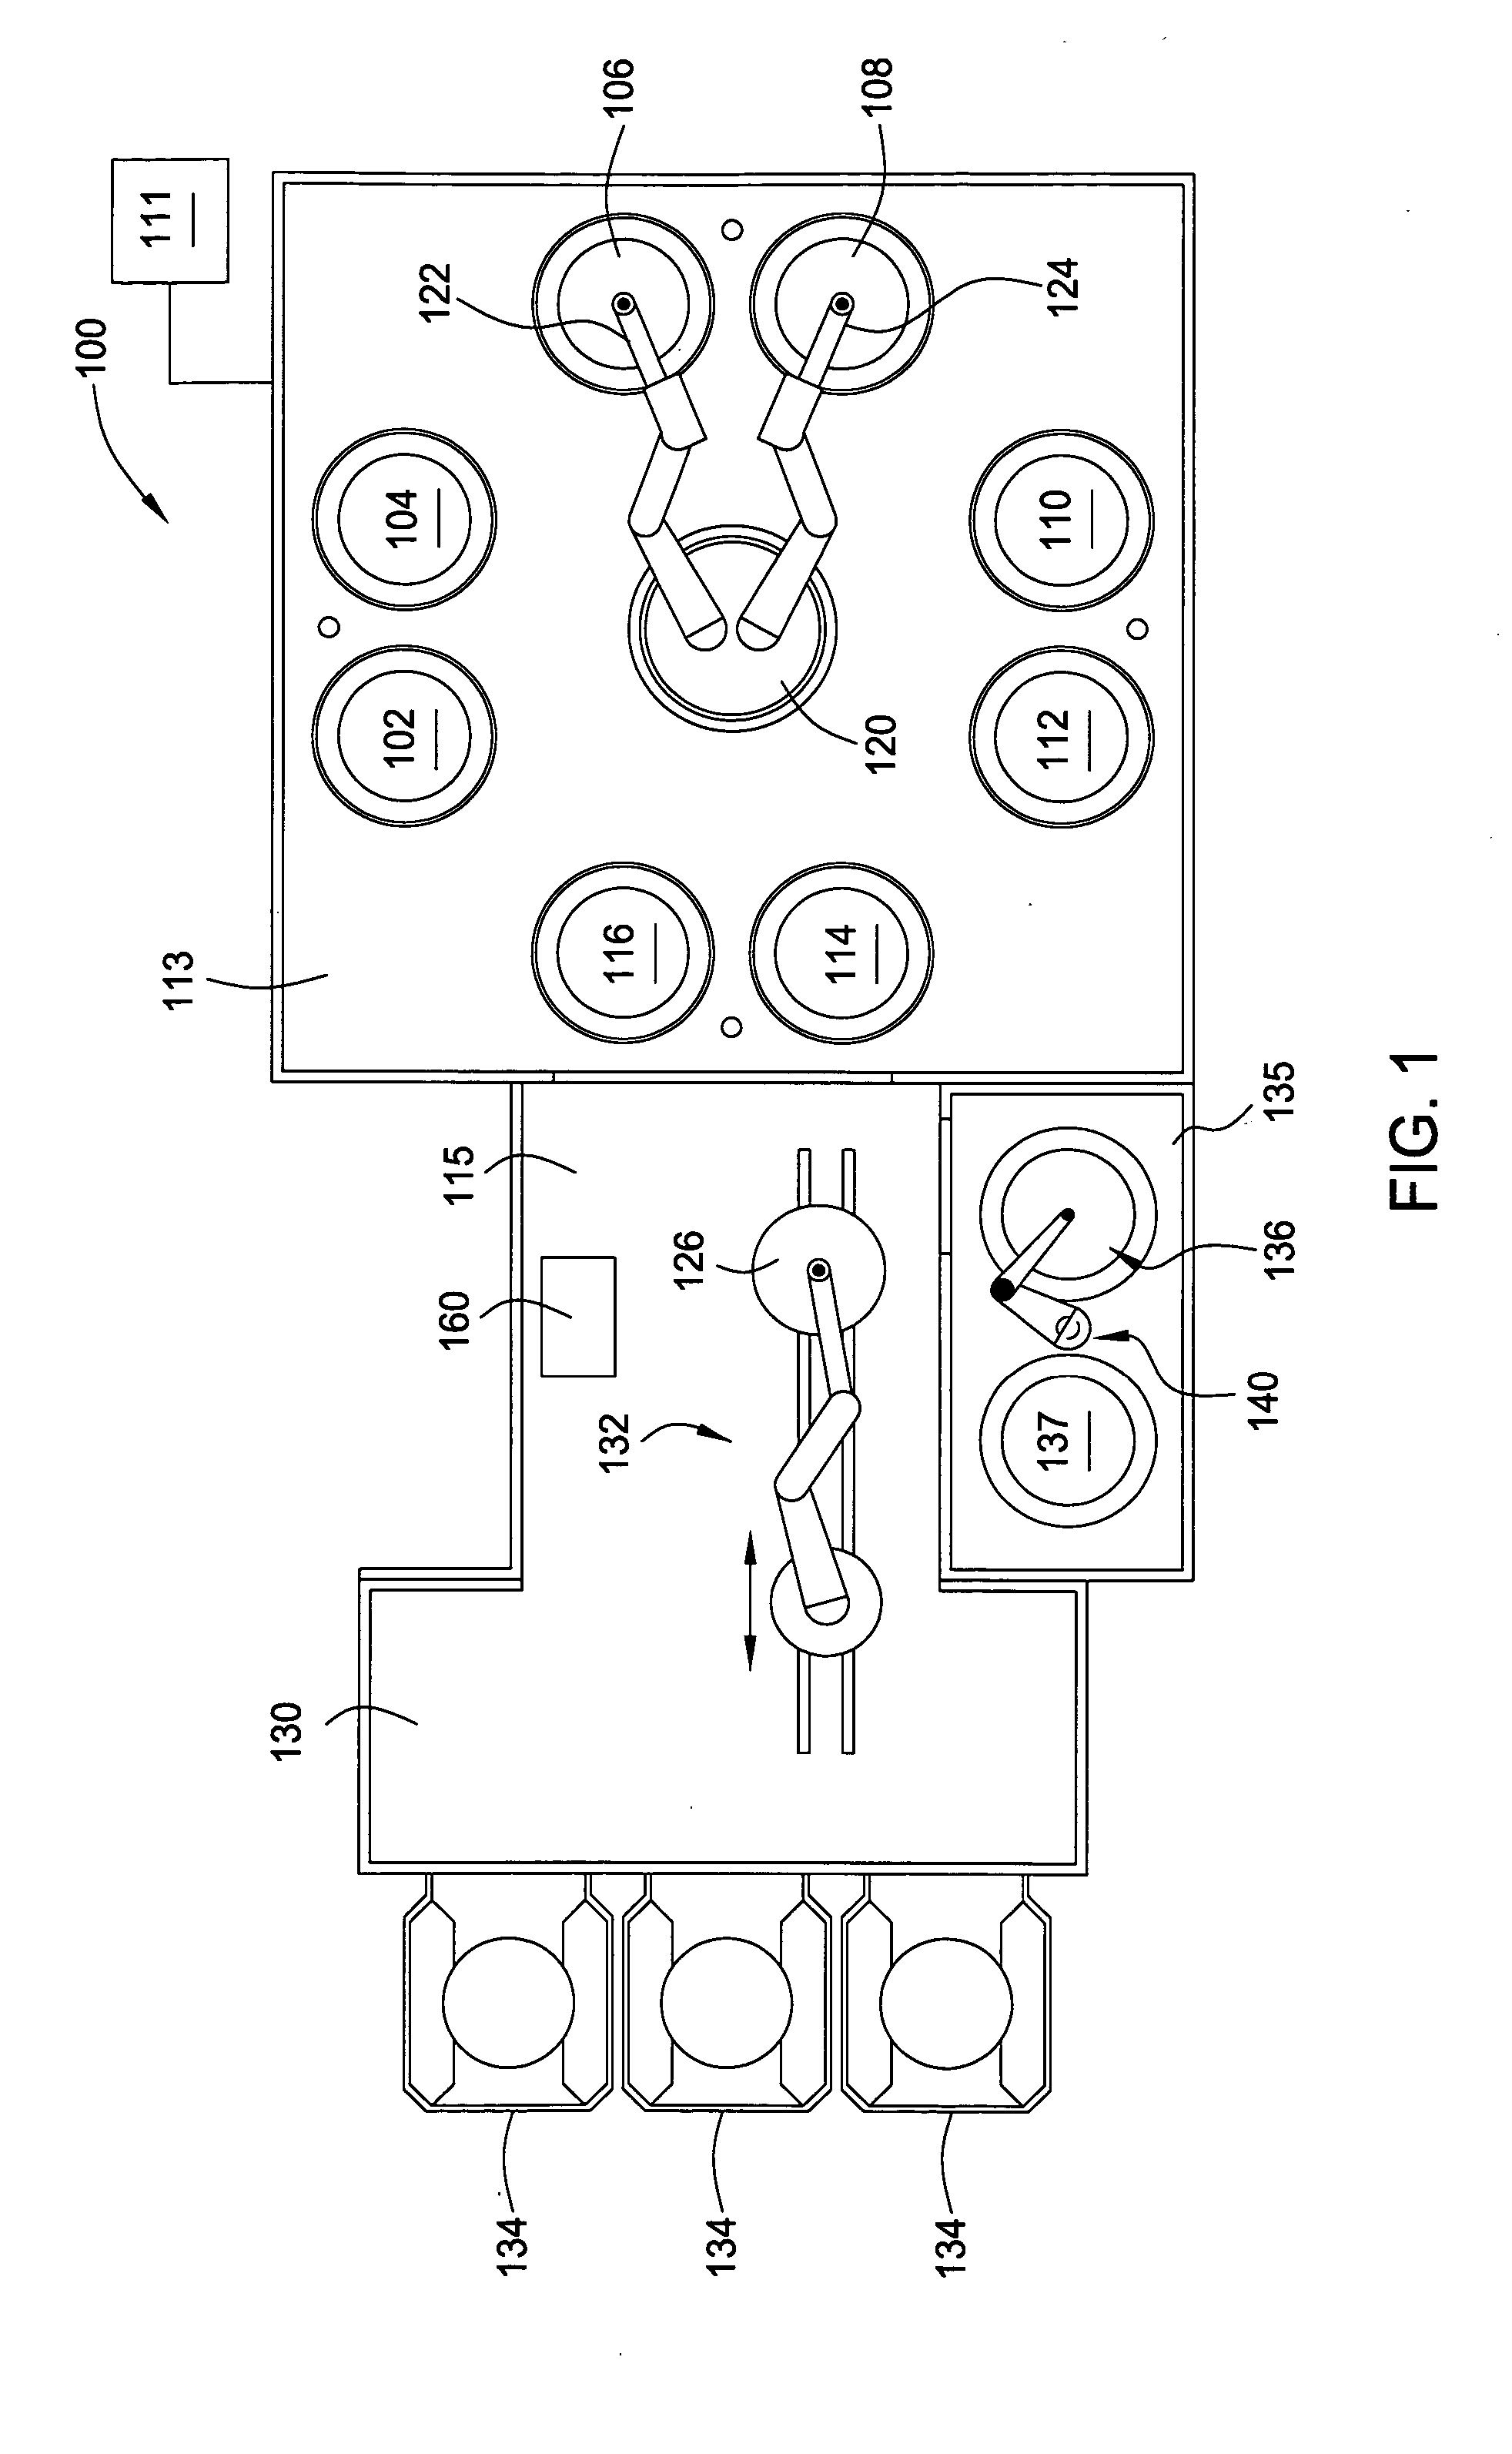 Apparatus for electroless deposition